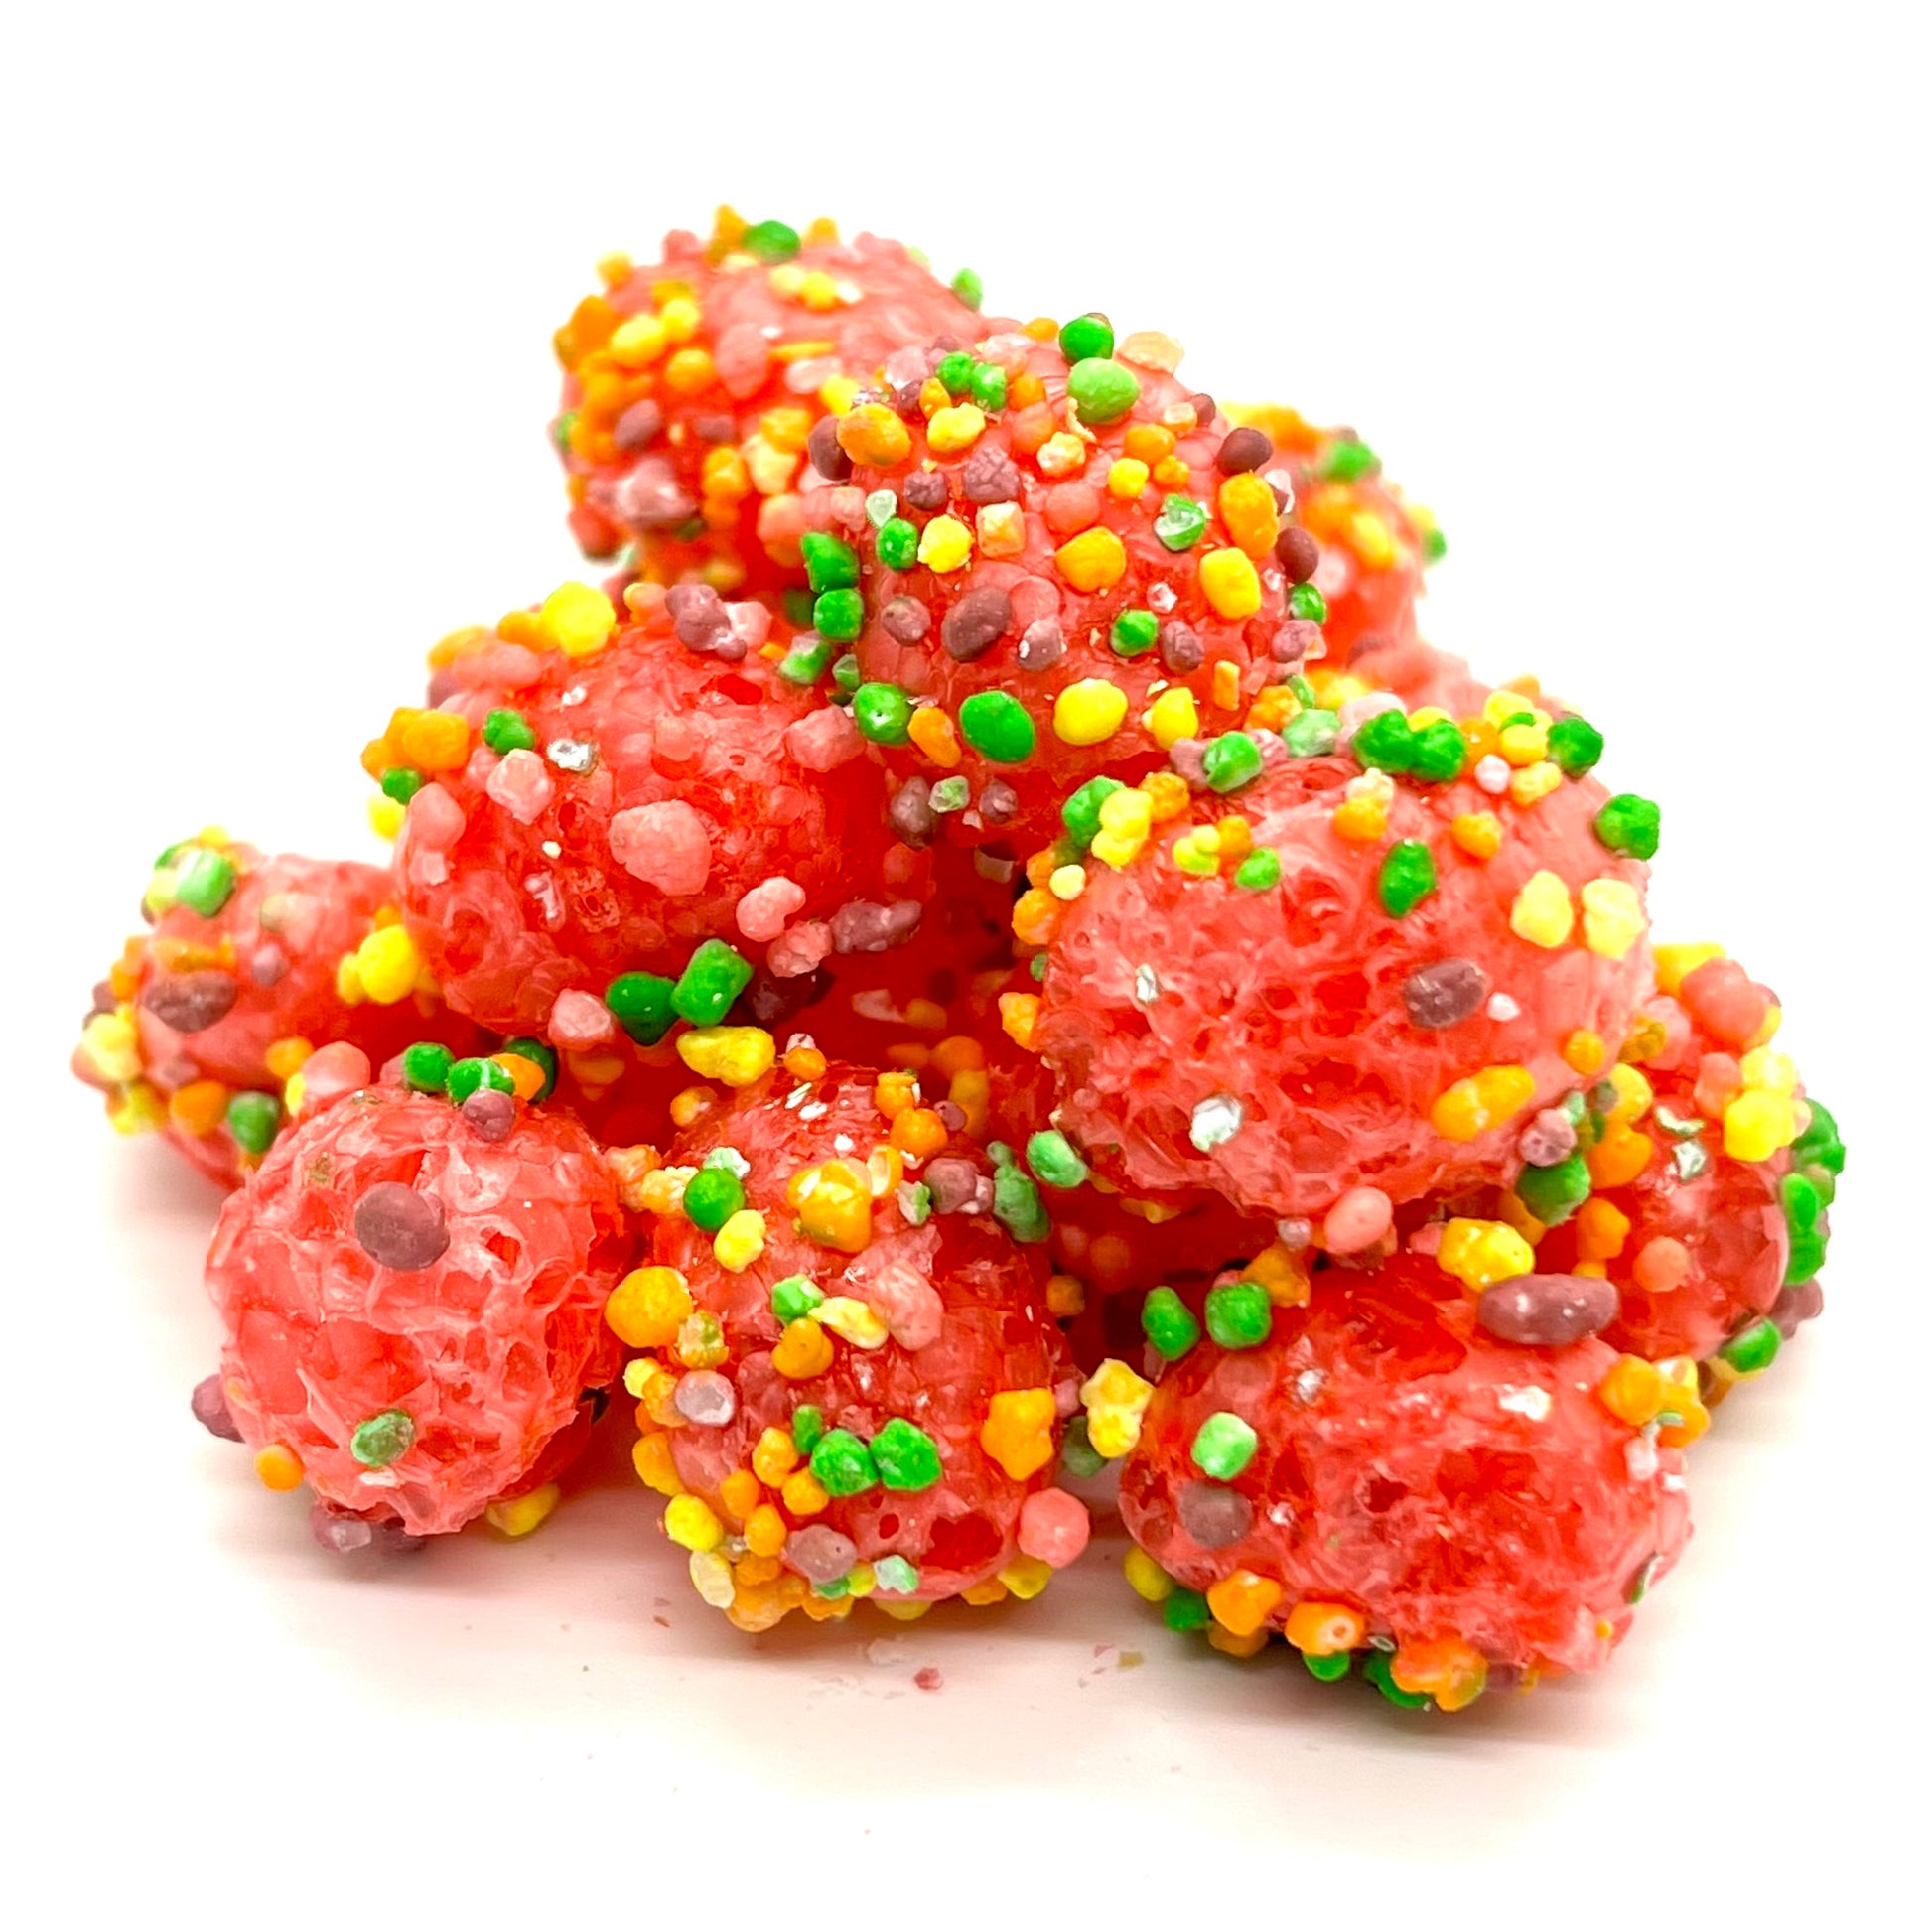 (NEW) BUSS DA' CLUSTERS - Freeze Dried Nerd Clusters - Wholesale Unlimited Inc.